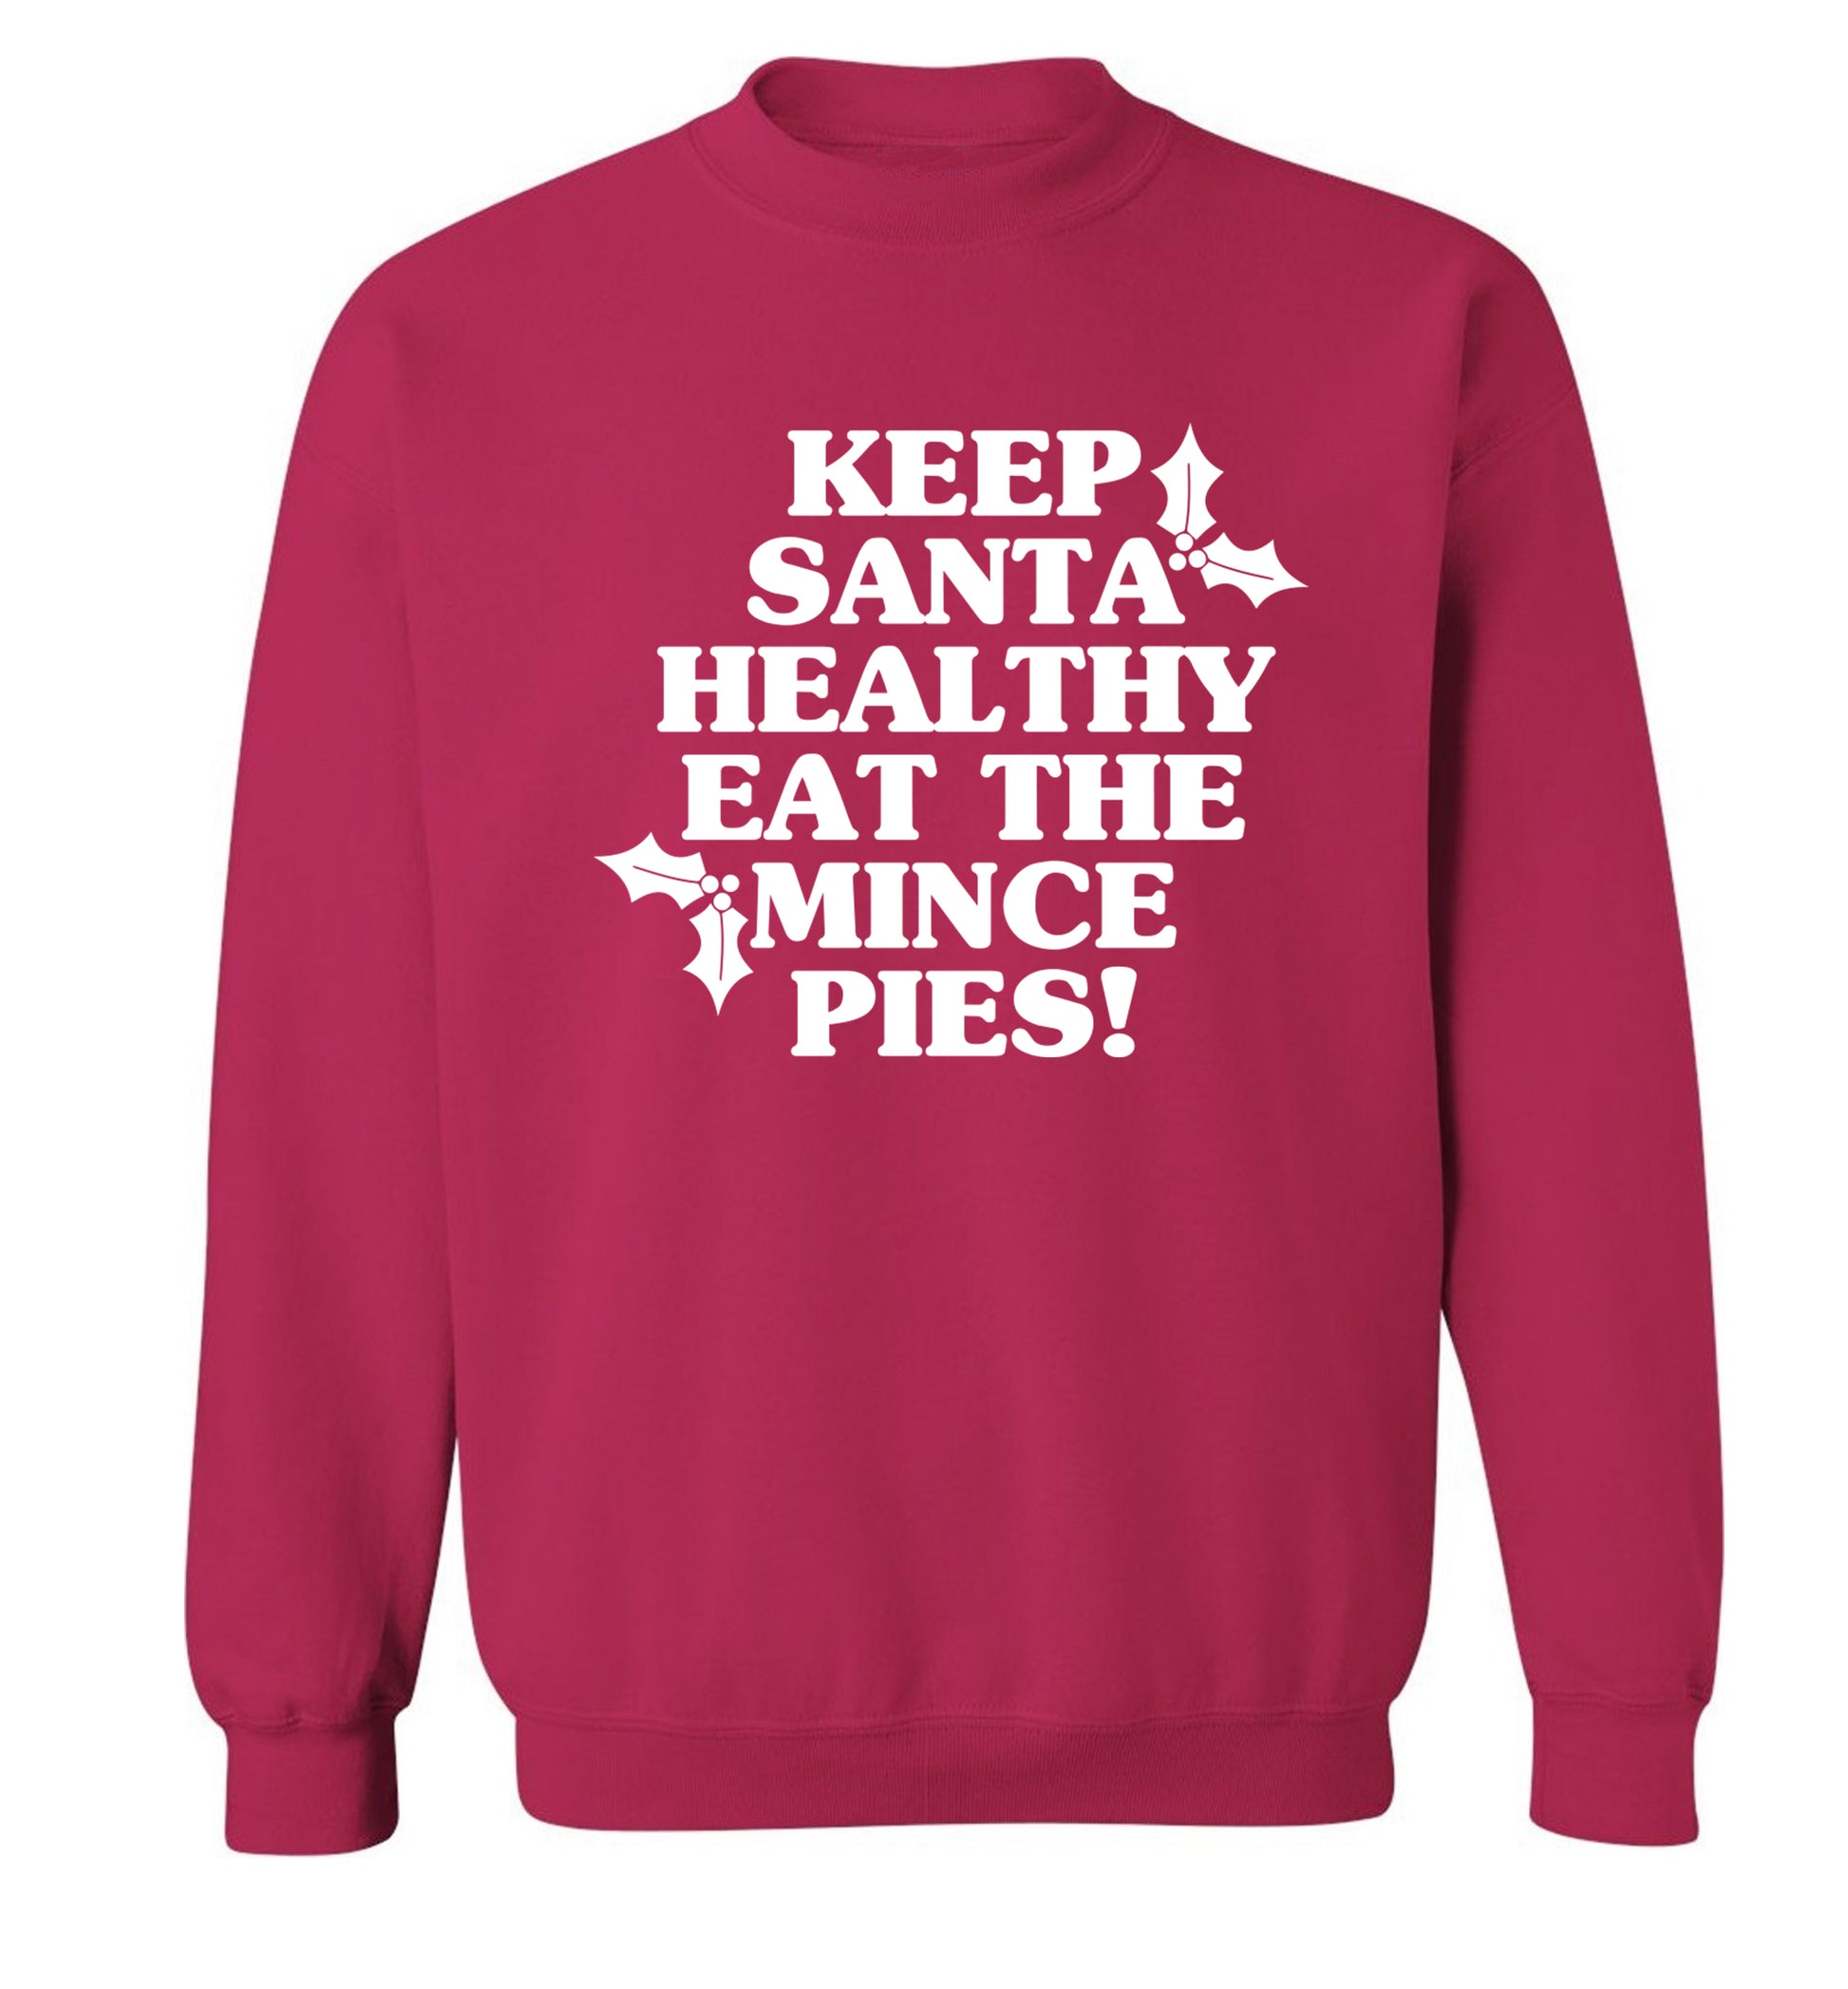 Keep santa healthy eat the mince pies Adult's unisex pink Sweater 2XL